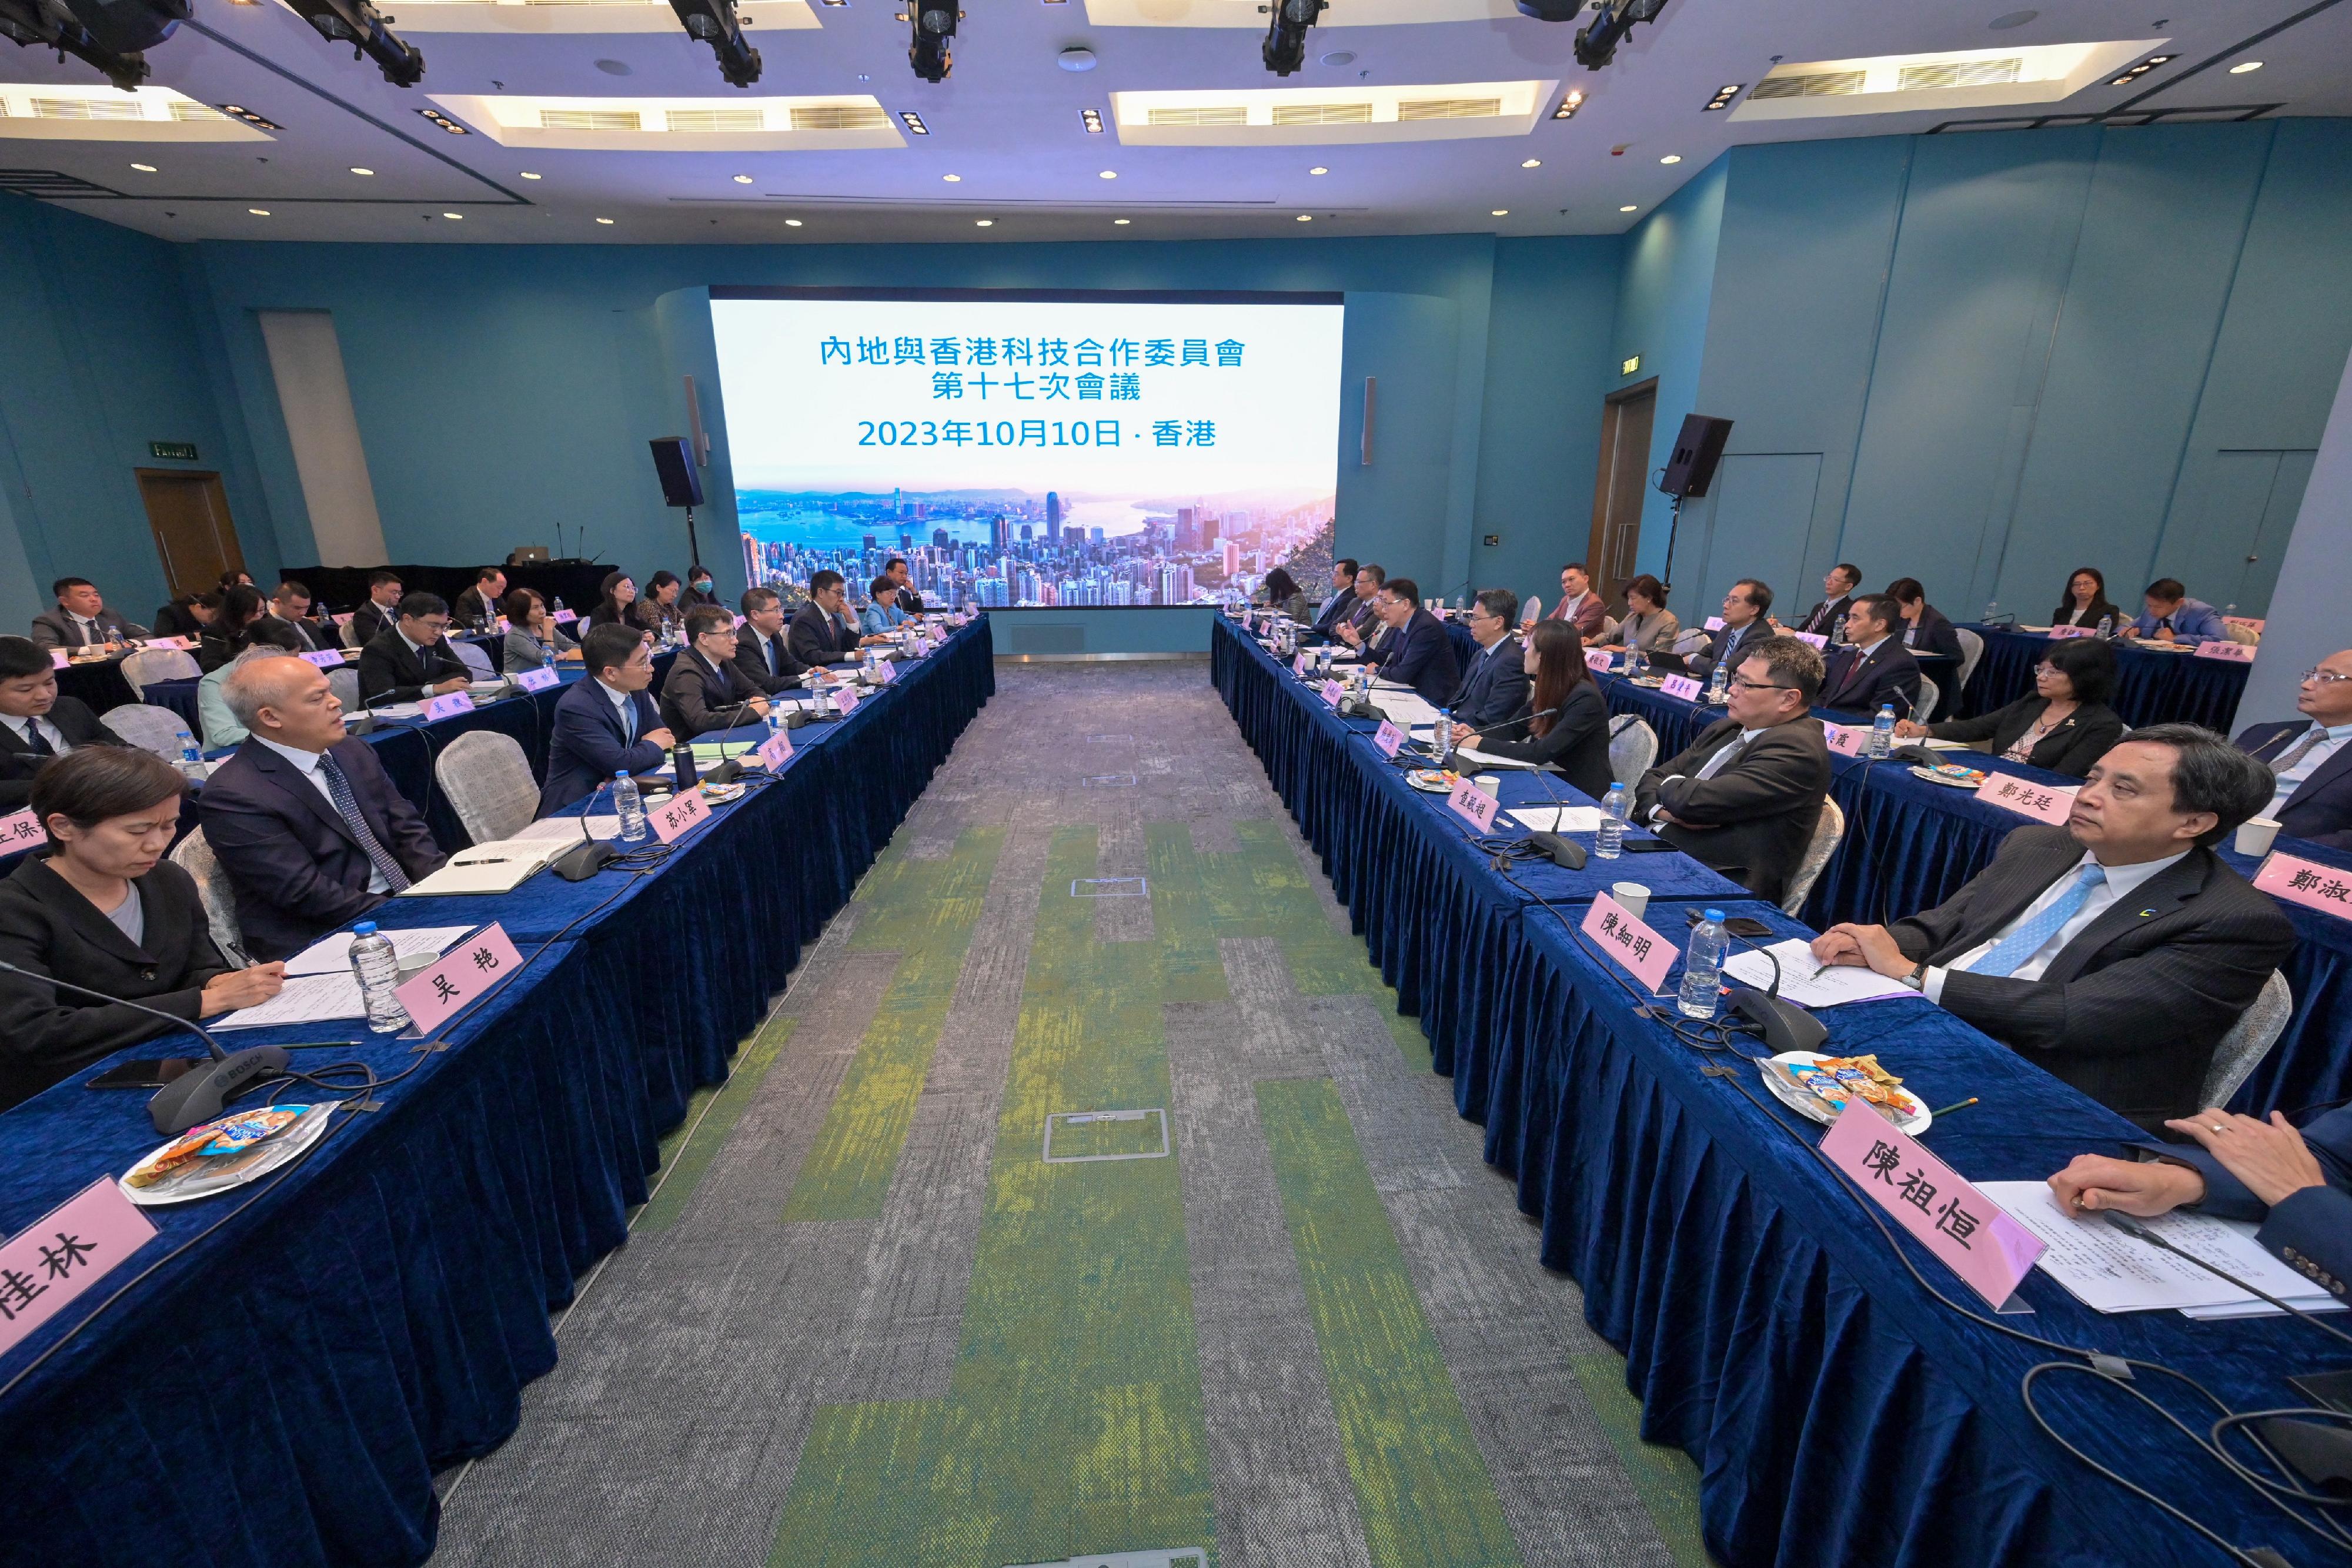 The Secretary for Innovation, Technology and Industry, Professor Sun Dong, (fifth right), and Vice Minister of Science and Technology, Professor Zhang Guangjun (fifth left) co-chair the 17th meeting of the Mainland/Hong Kong Science and Technology Co-operation Committee in Hong Kong today (October 10).